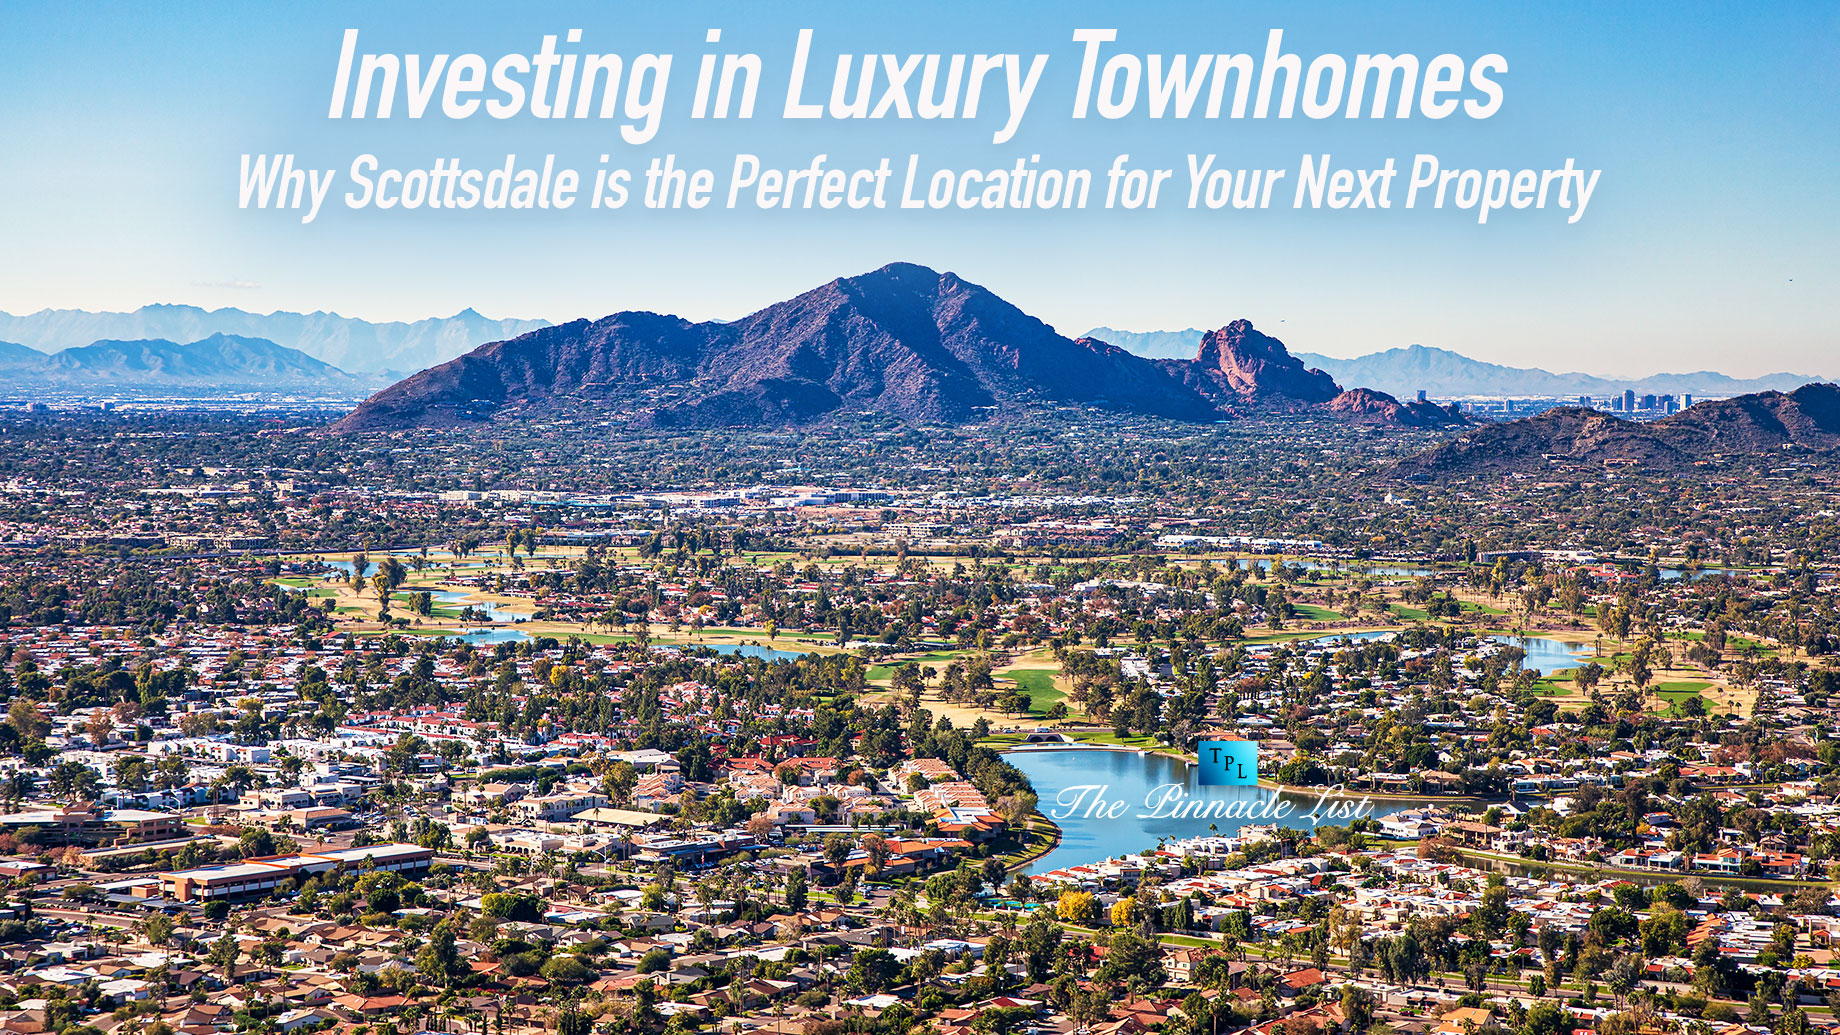 Investing in Luxury Townhomes: Why Scottsdale is the Perfect Location for Your Next Property